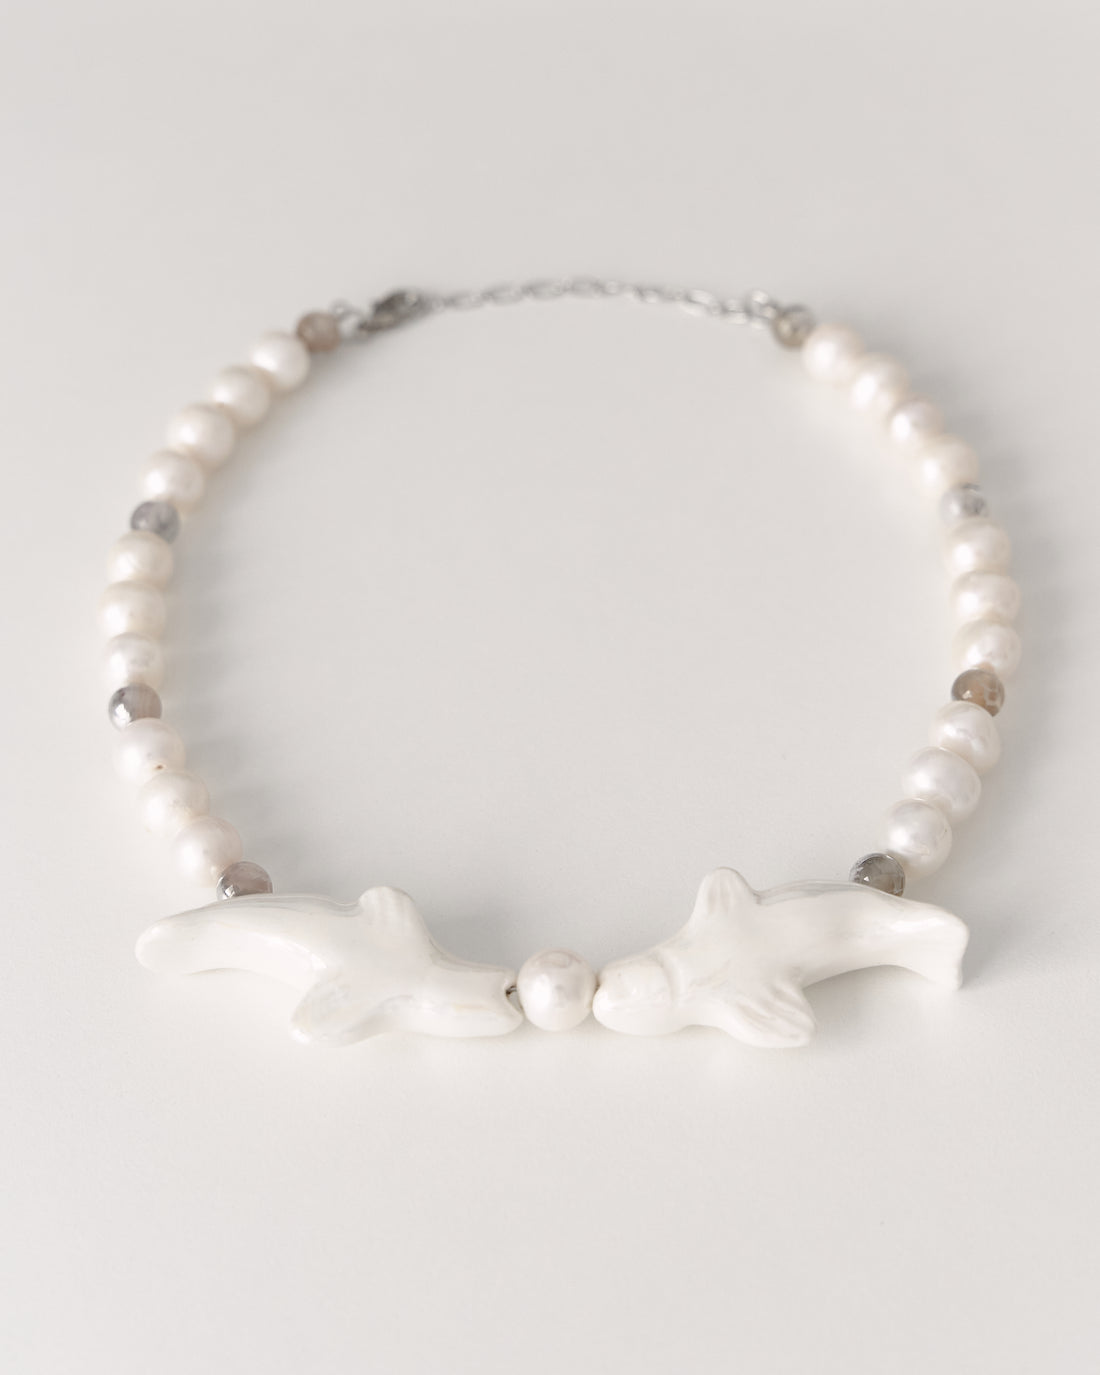 Khvyli necklace with pearls and porcelain fish